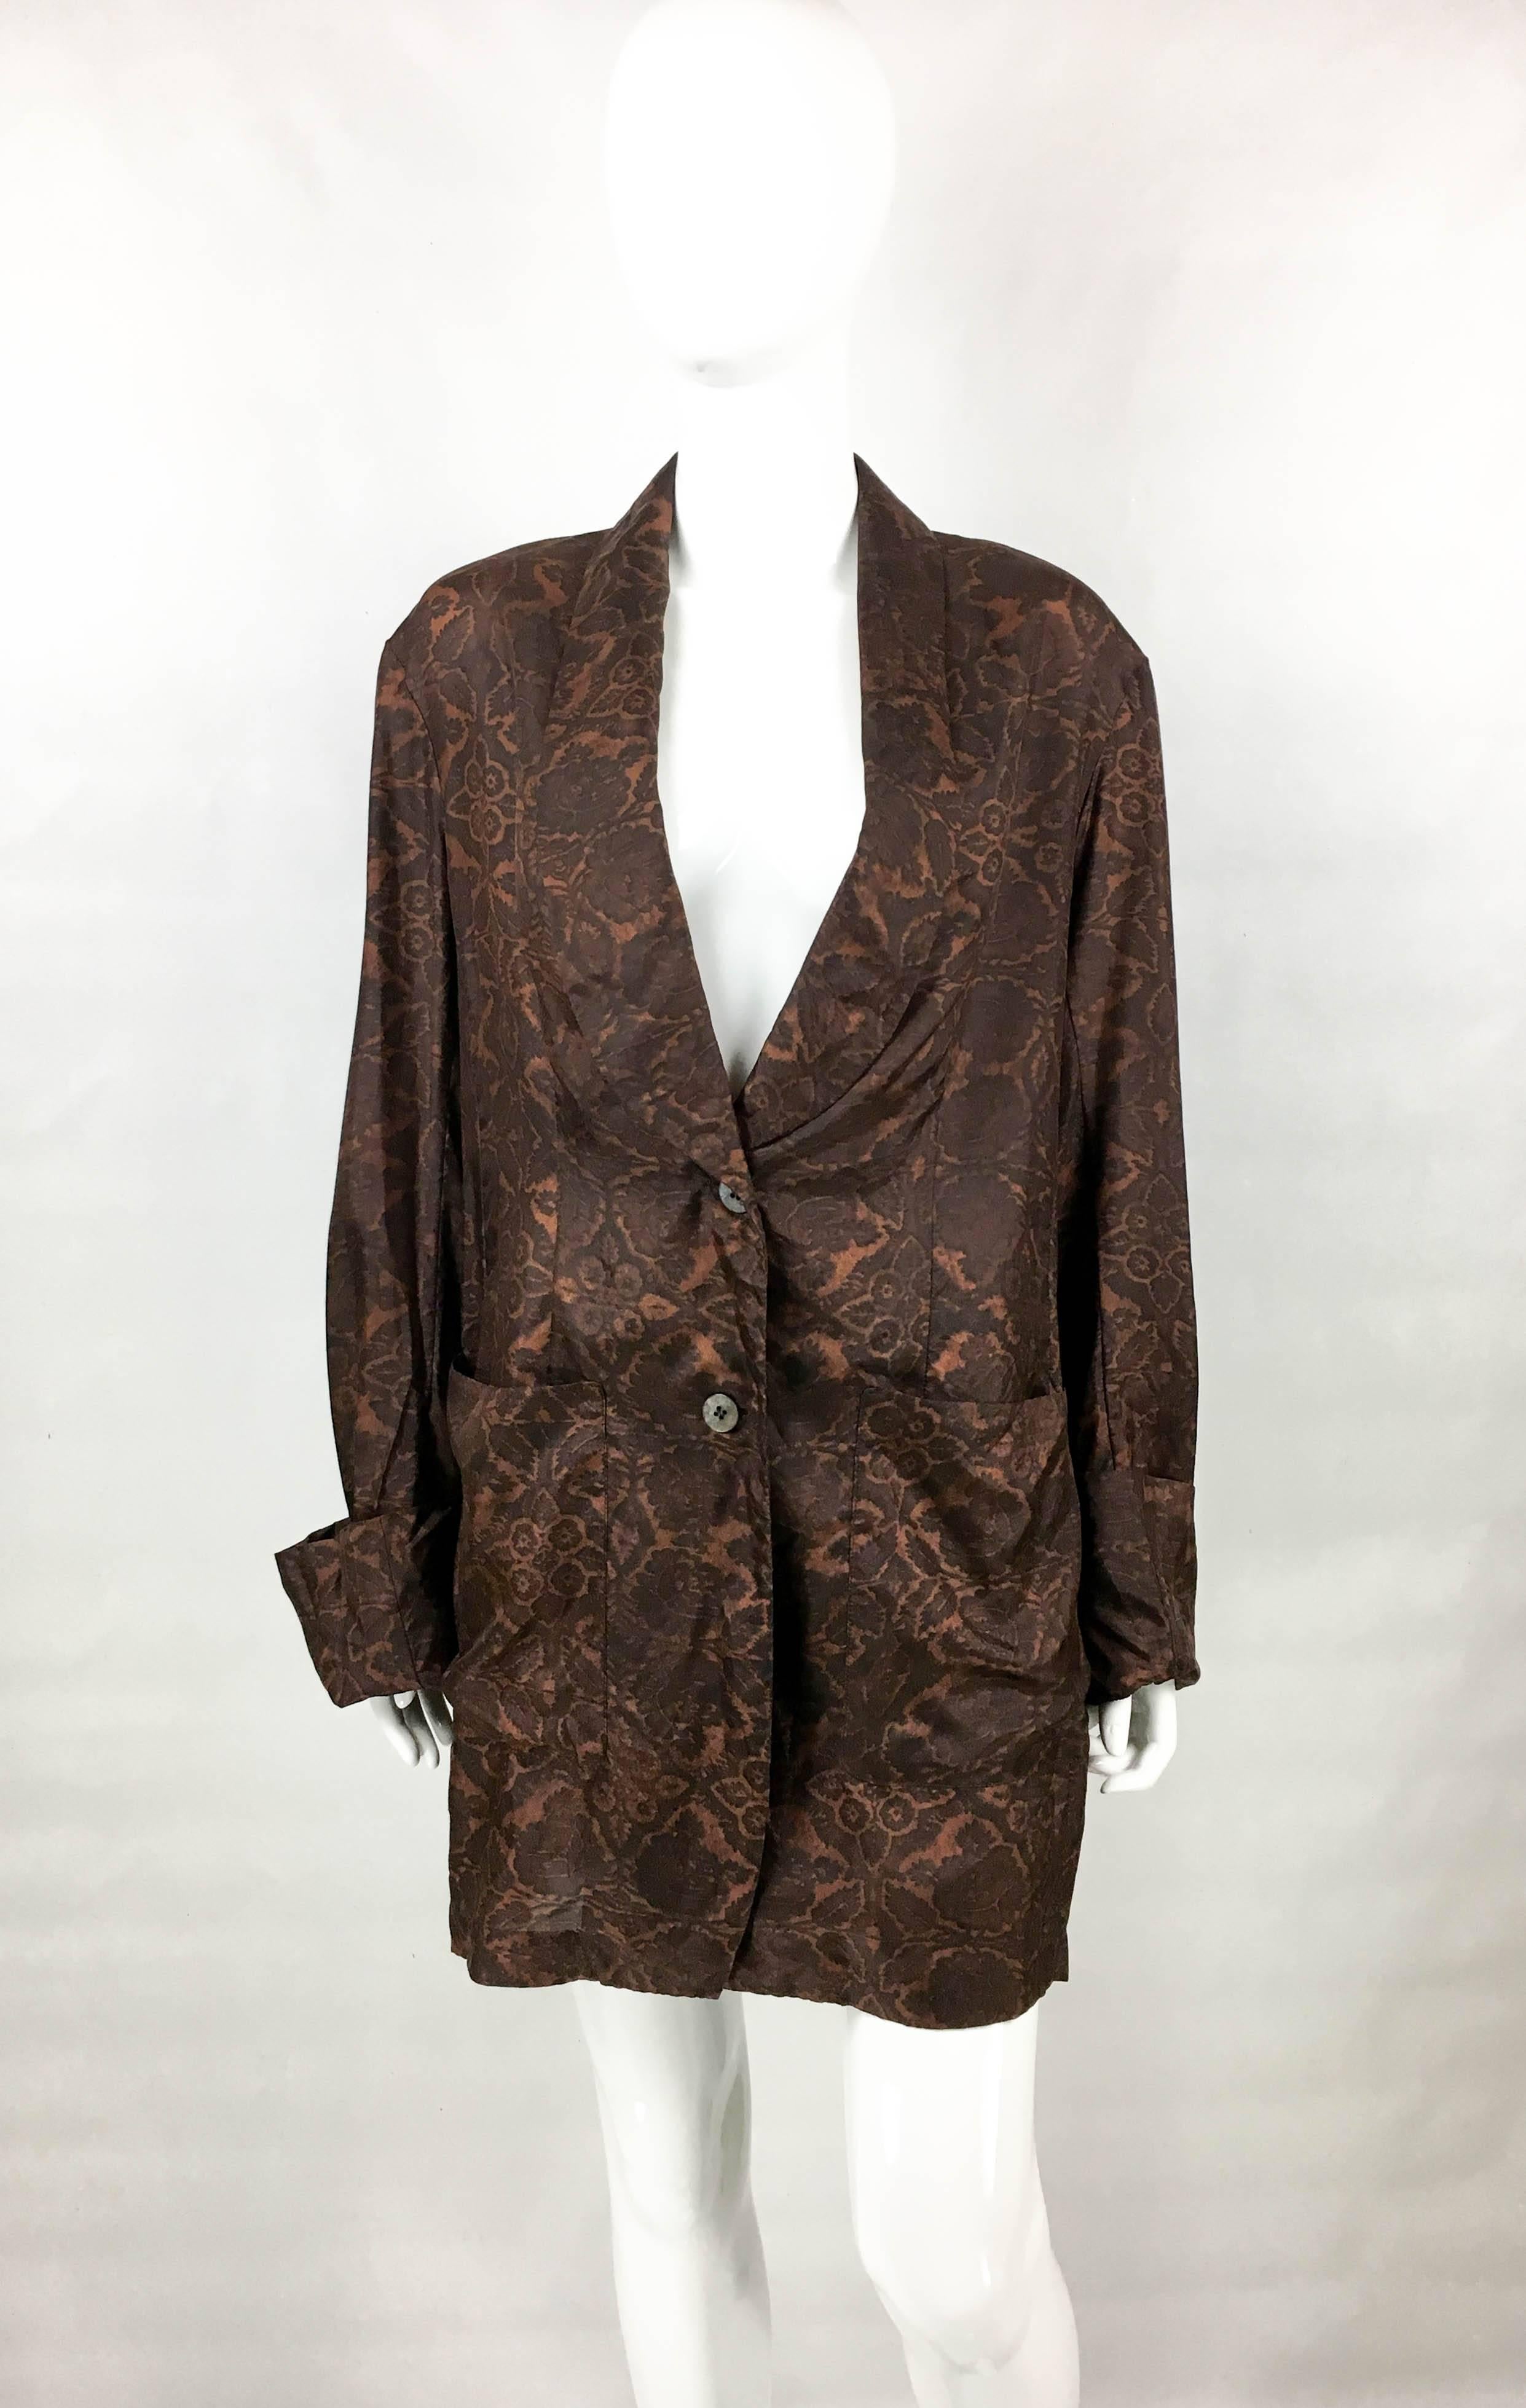 Stylish Vintage Dries Van Noten Deconstructed Silk Shirt / Jacket. Made in pure silk, this 1990’s pyjama style jacket features a floral pattern in accents of brown. The design is oversized, with very long sleeves, single breasted with 2 buttons and